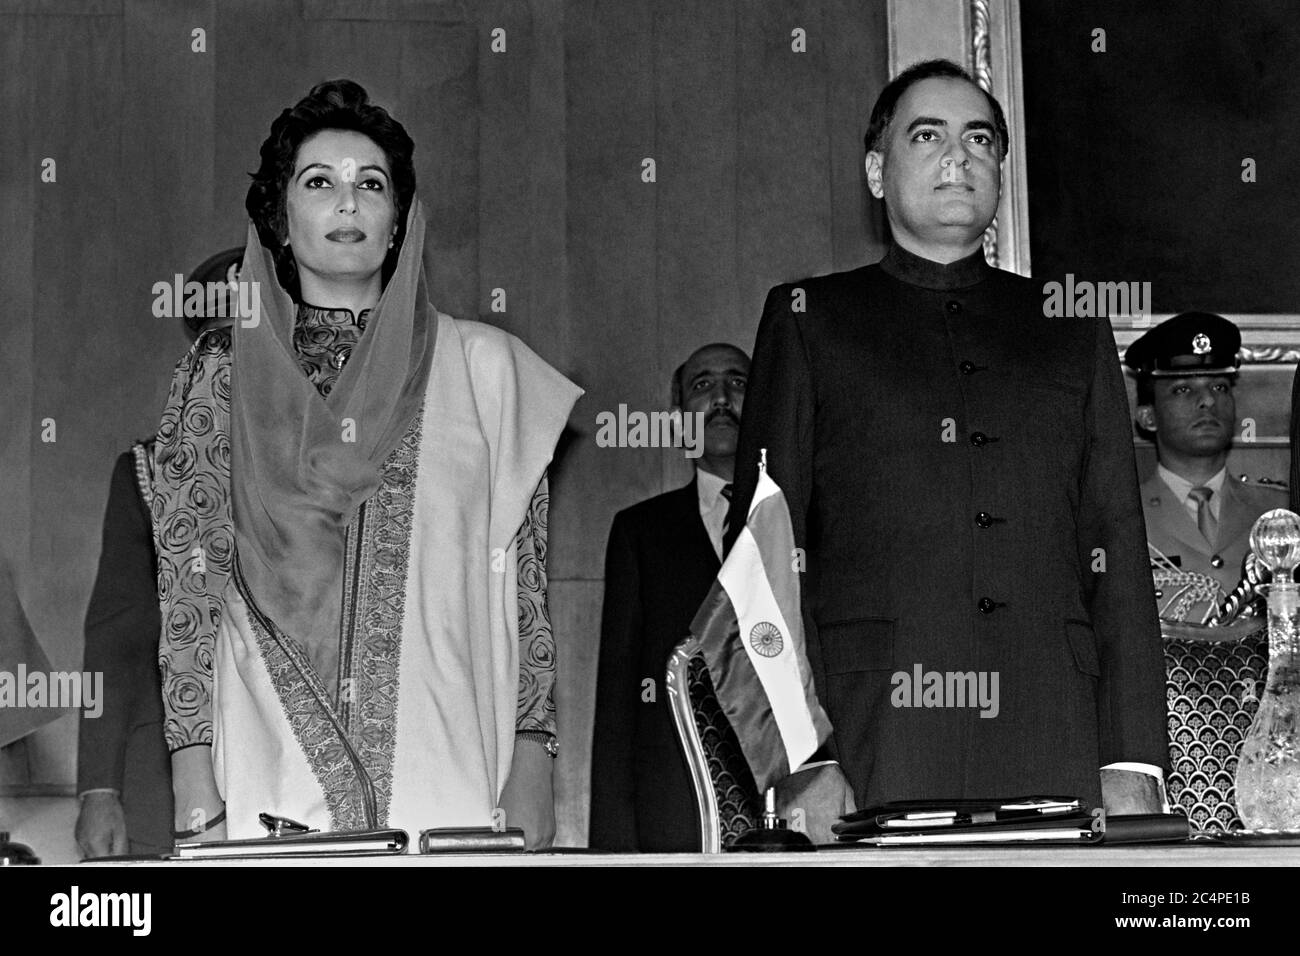 Pakistan Prime Minister Benazir Bhutto, left, and Indian Prime Minister Rajiv Gandhi stand together during the start of the fourth SAARC Summit meeting December 29, 1988 in Islamabad, Pakistan. The gathering of South Asian leaders includes Pakistan, India, Bangladesh, the Maldives, Sri Lanka, Bhutan and Nepal. Stock Photo